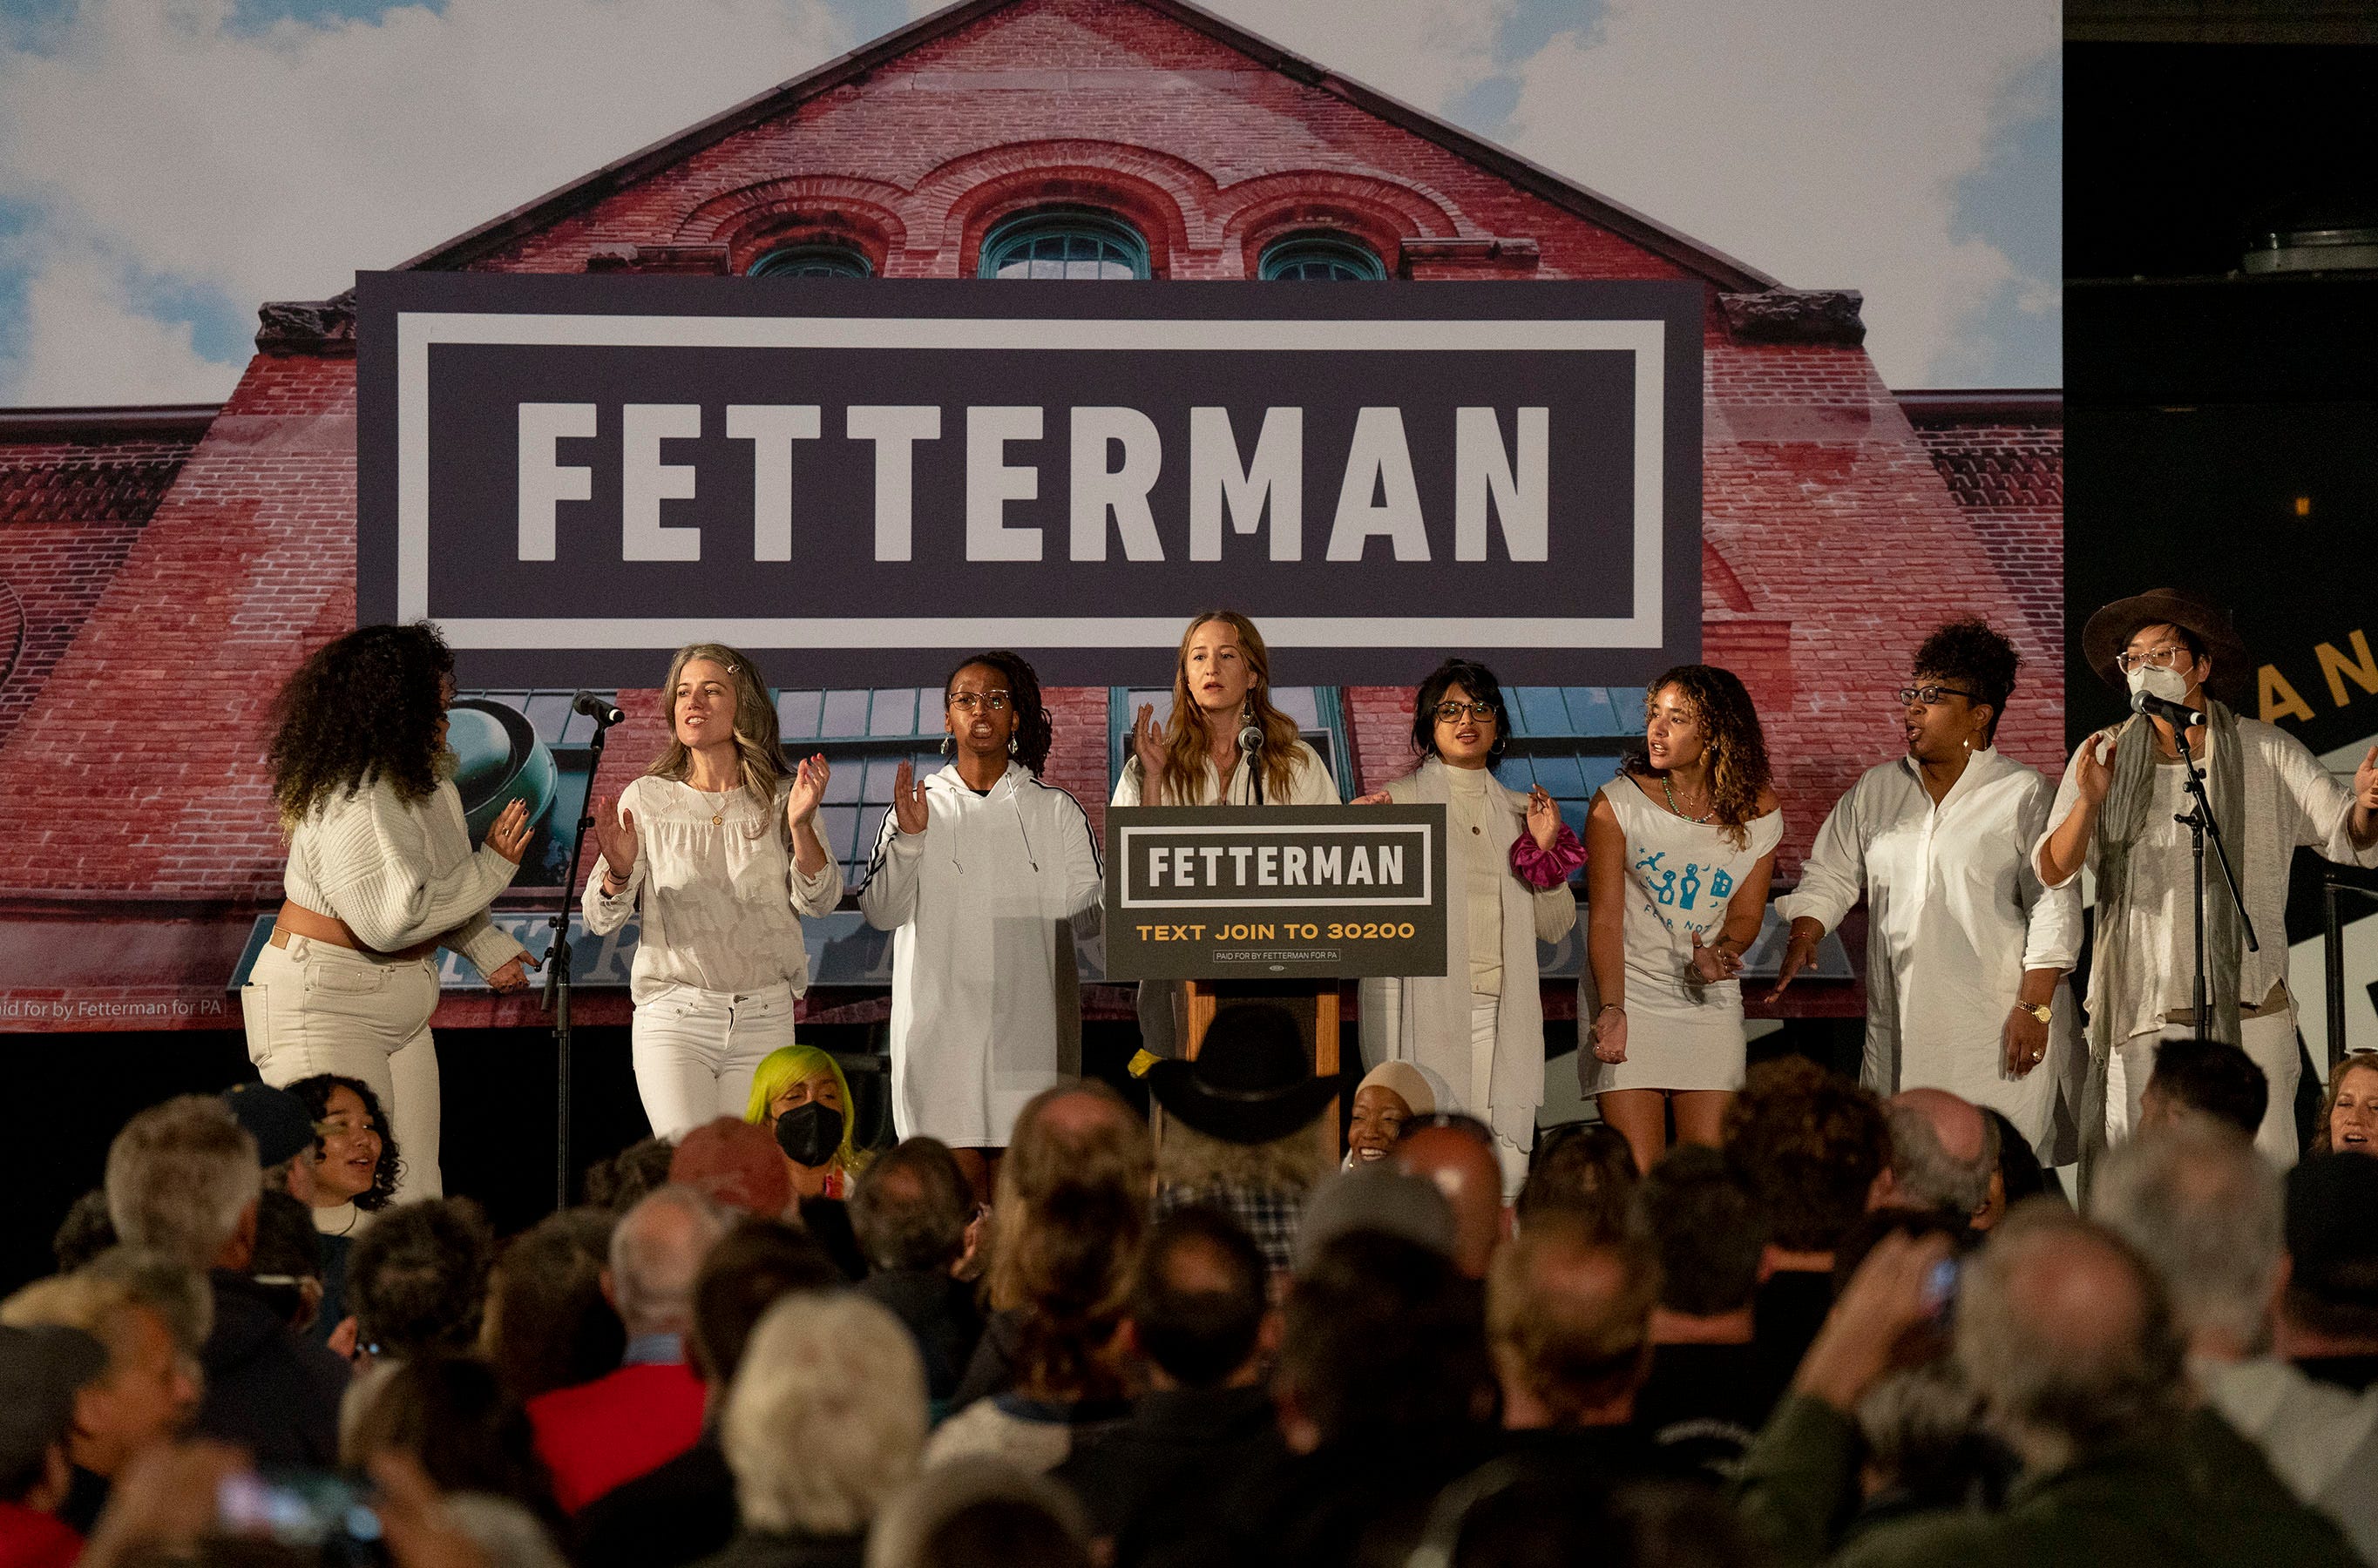 The Resistance Revival Chorus, from New York City, performing before John Fetterman and guests spoke at the rally in York on Saturday, Oct. 8, 2022.